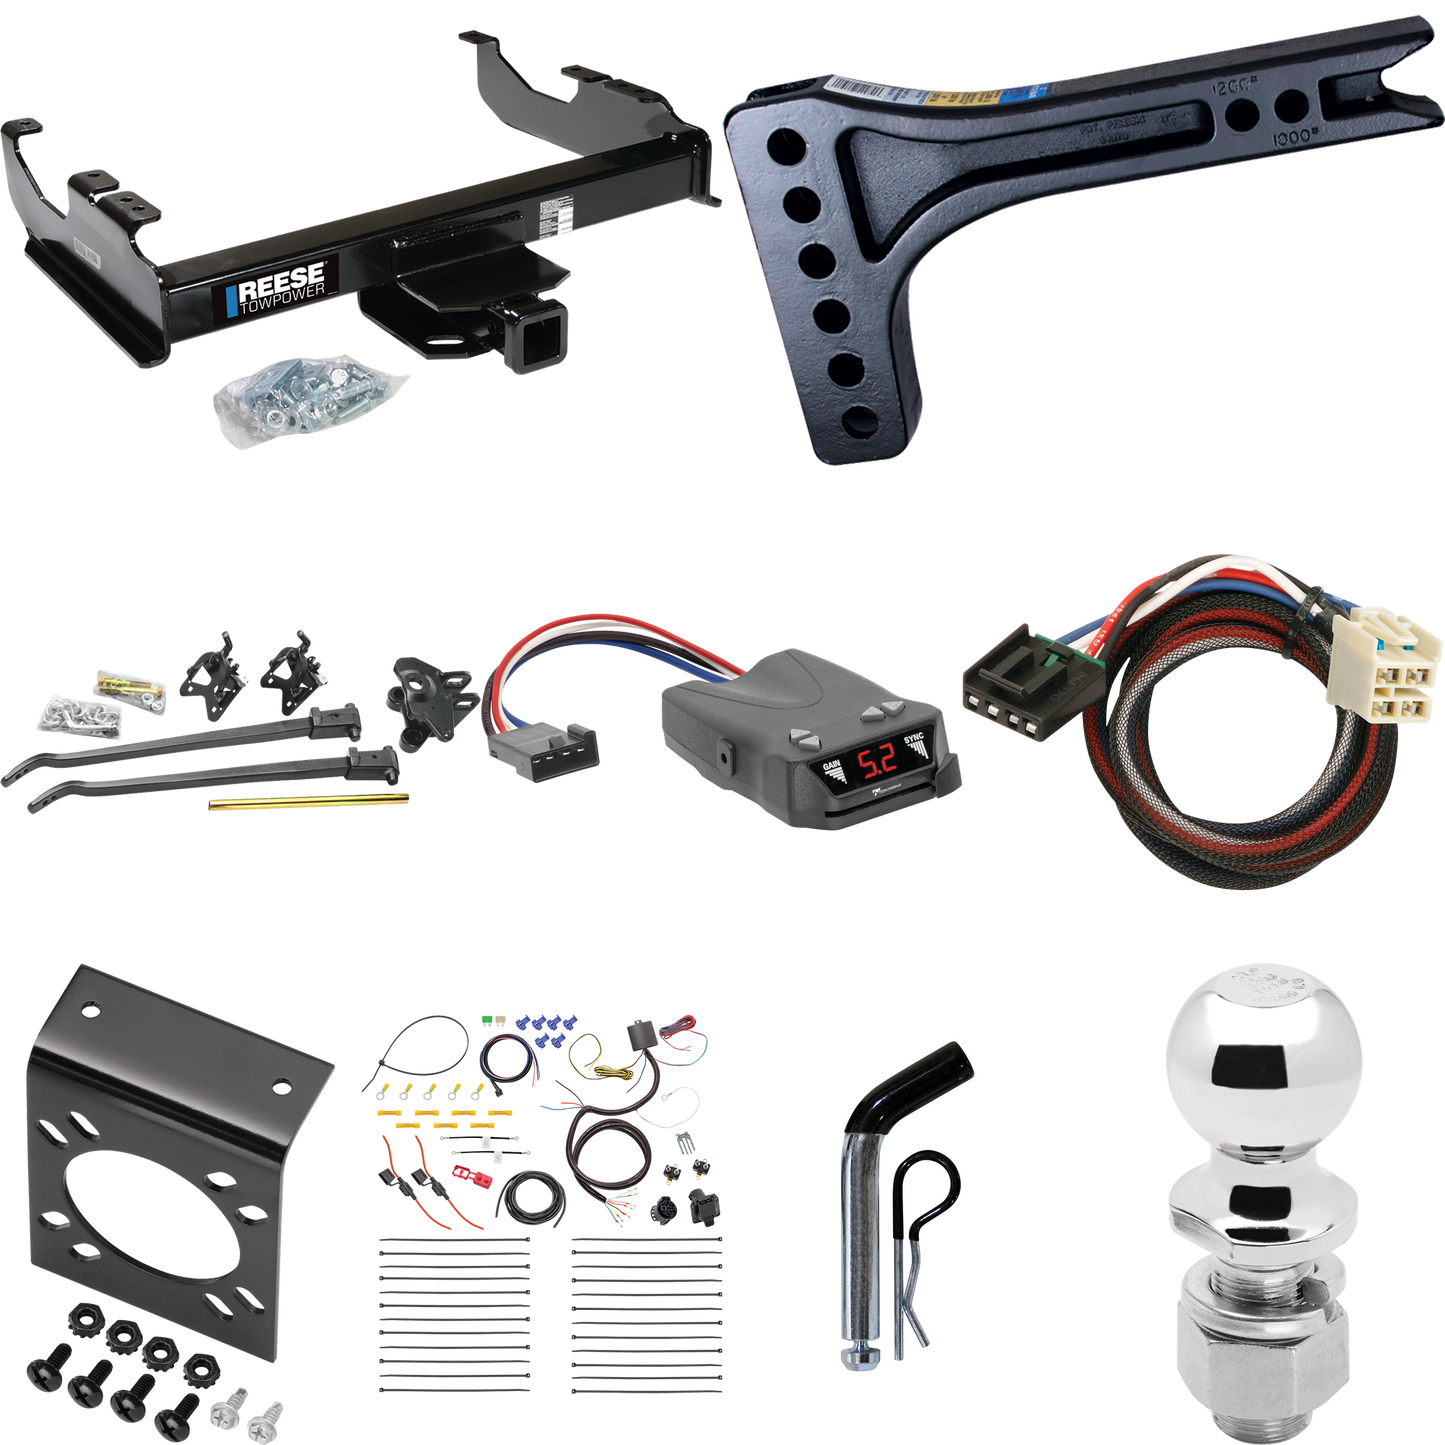 Fits 2015-2019 GMC Sierra 3500 HD Trailer Hitch Tow PKG w/ 15K Trunnion Bar Weight Distribution Hitch + Pin/Clip + 2-5/16" Ball + Tekonsha Brakeman IV Brake Control + Plug & Play BC Adapter + 7-Way RV Wiring (For Cab & Chassis, w/34" Wide Frames Mode